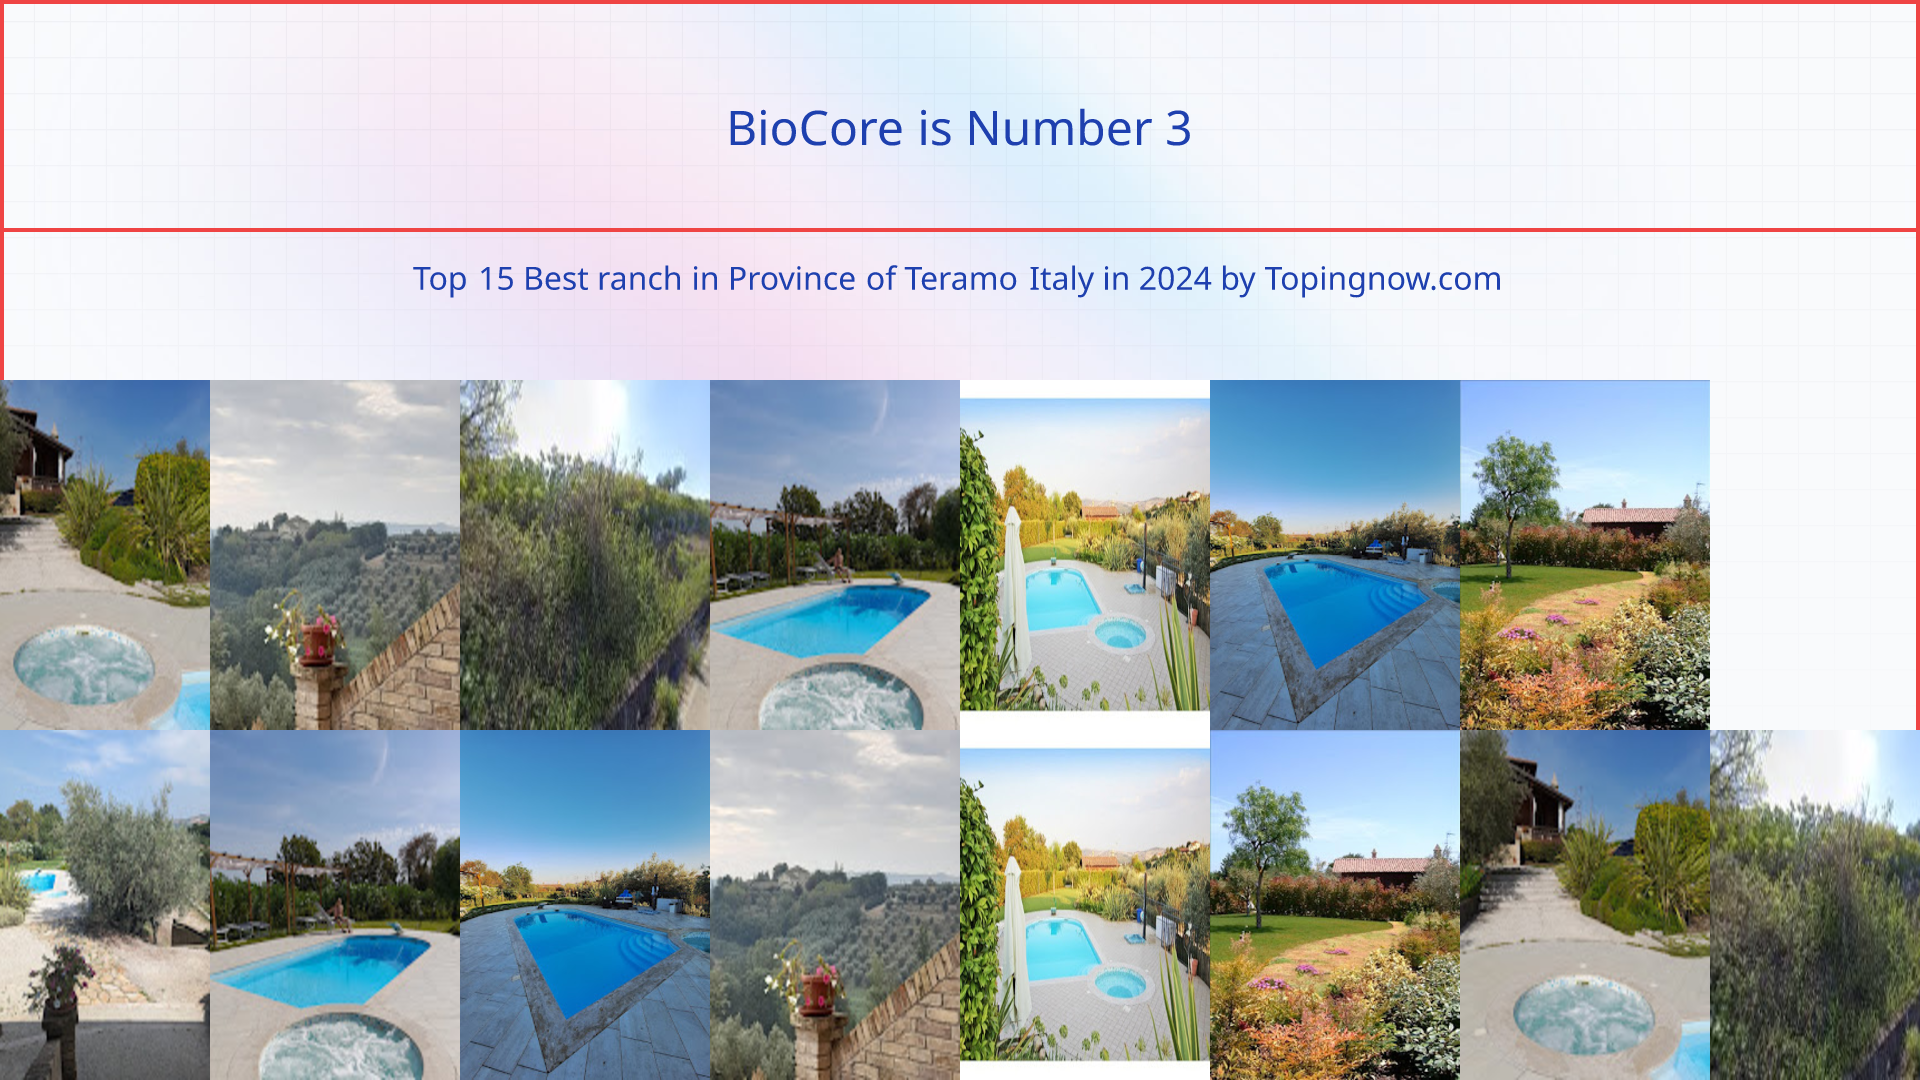 BioCore: Top 15 Best ranch in Province of Teramo Italy in 2024